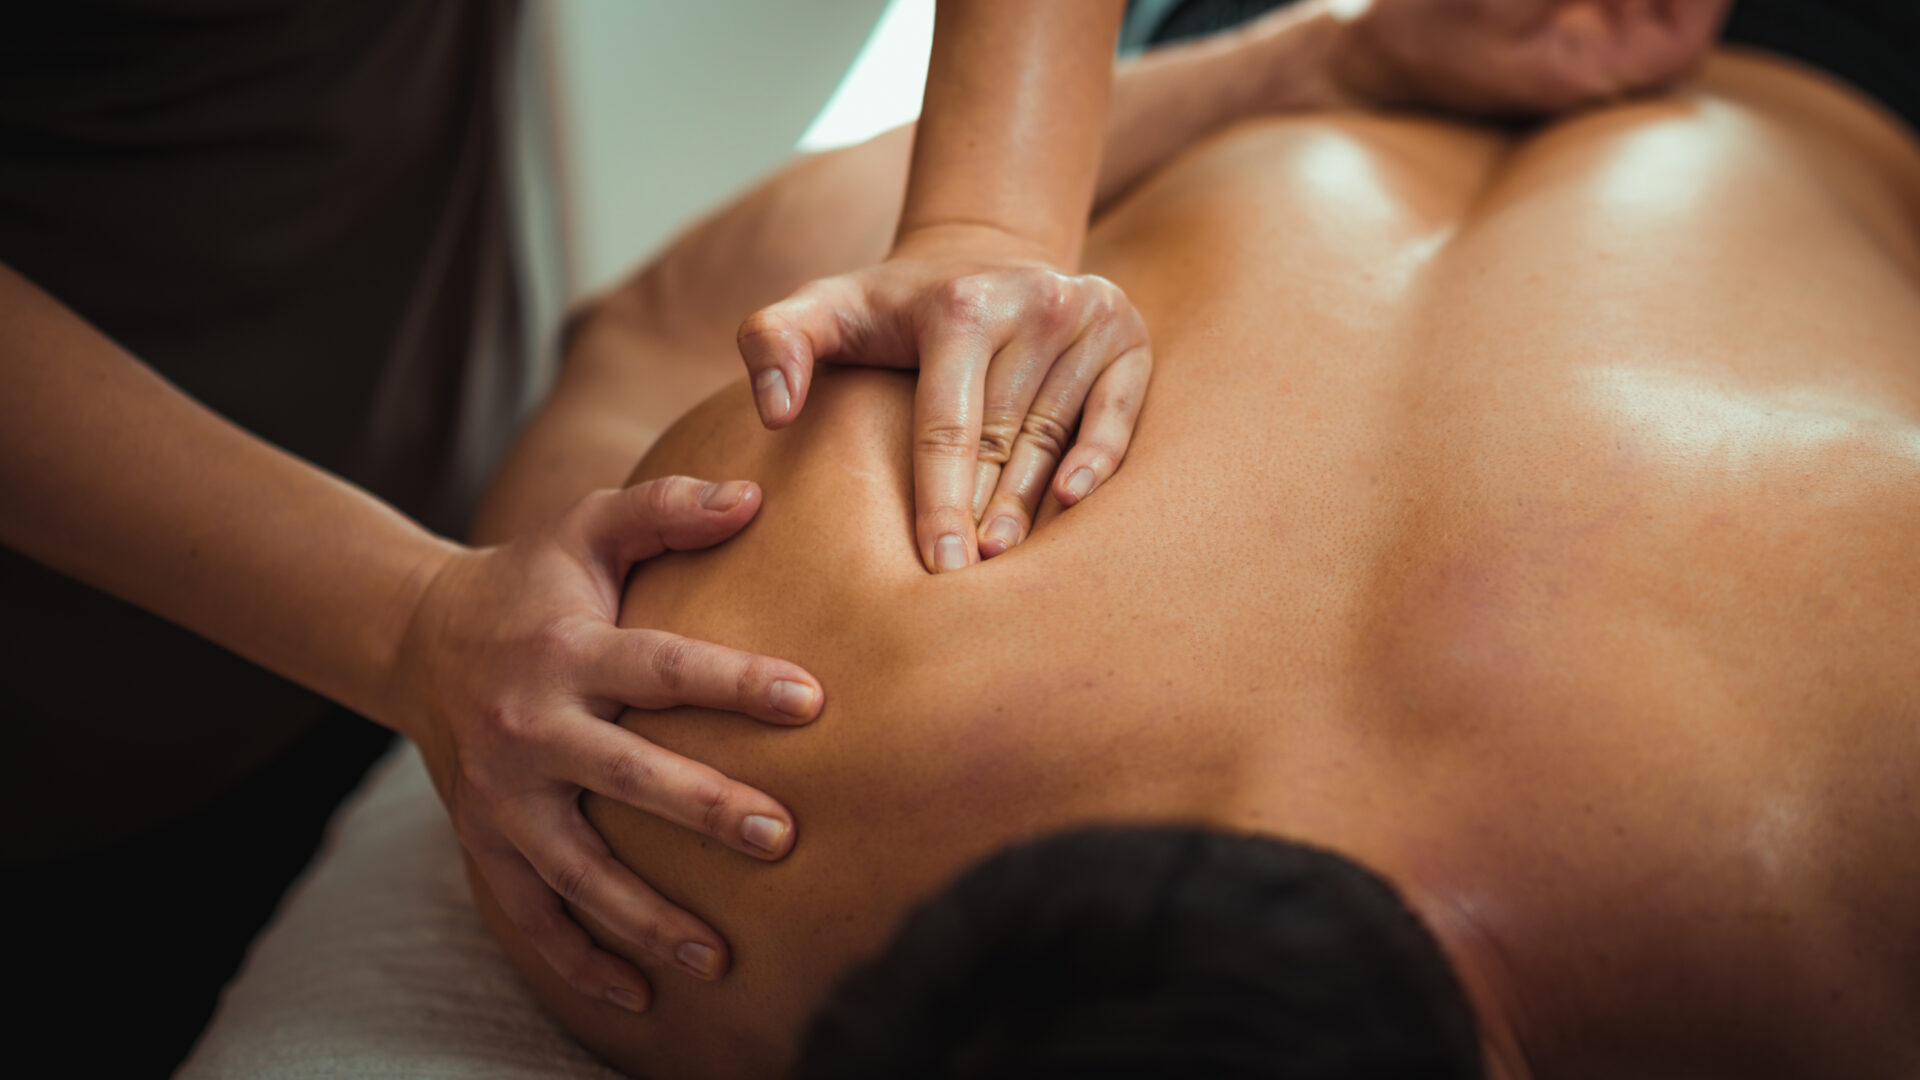 Close up of a man getting deep tissue massage, a type of manual therapy